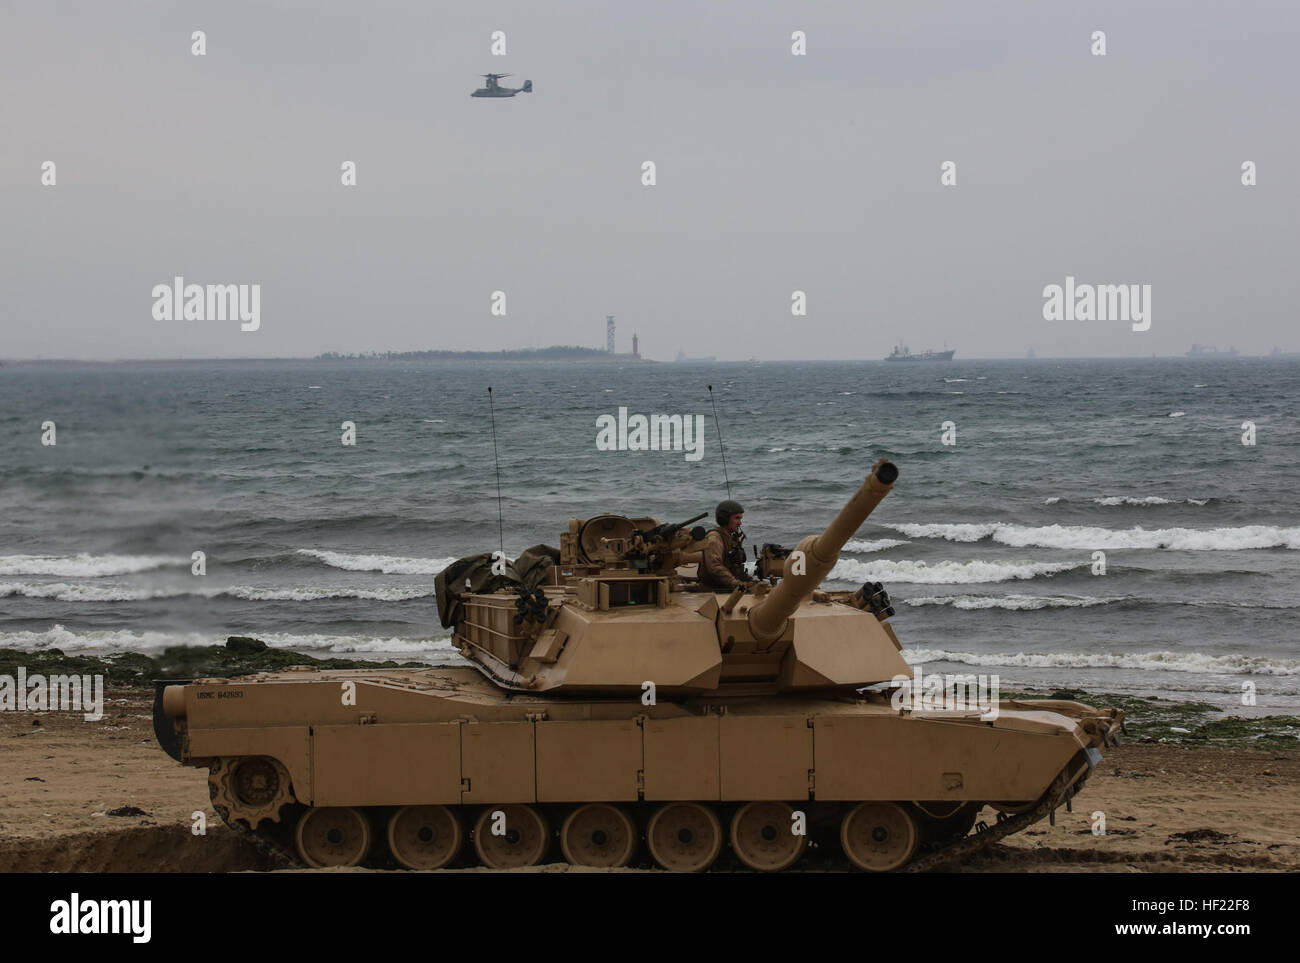 Marines with Charlie Company, 4th Tanks Battalion, drive a M1A1 Tank onto Dogue Beach during exercise Ssang Yong, Pohang, South Korea,  April 3, 2014. Exercise Ssang Yong is conducted annually in the ROK to enhance interoperability between U.S. and ROK forces by performing a full spectrum of amphibious operations while showcasing sea-based power projection in the Pacific. (U.S. Marine Corps photo by Cpl. Lauren Whitney/Released) Ssang Yong 14 140403-M-GZ082-229 Stock Photo